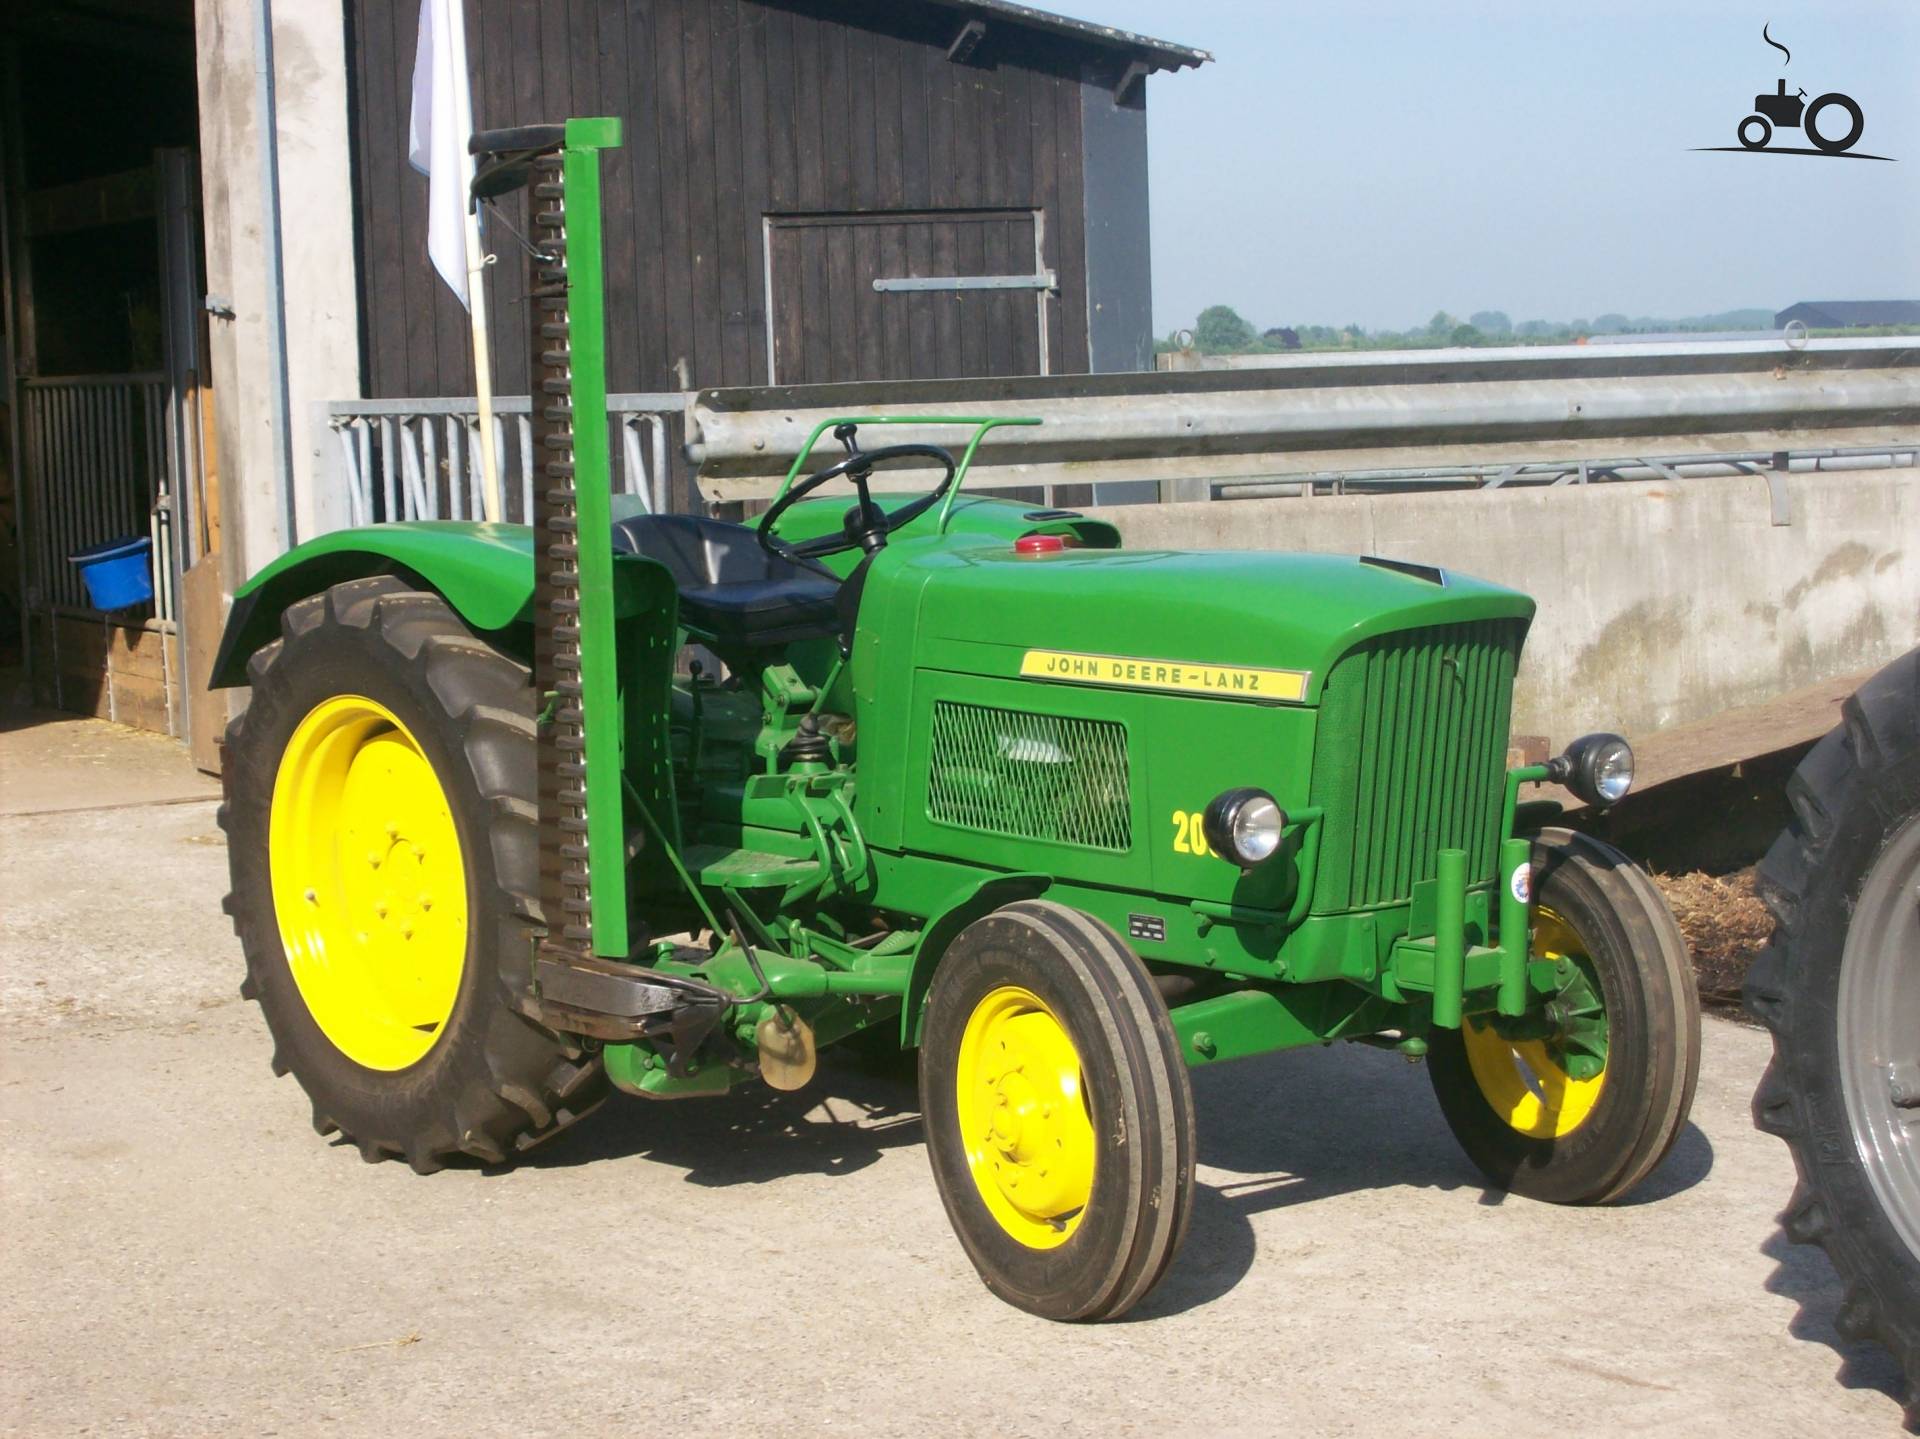 ... Lanz 200 Specs and data - Everything about the John Deere Lanz 200